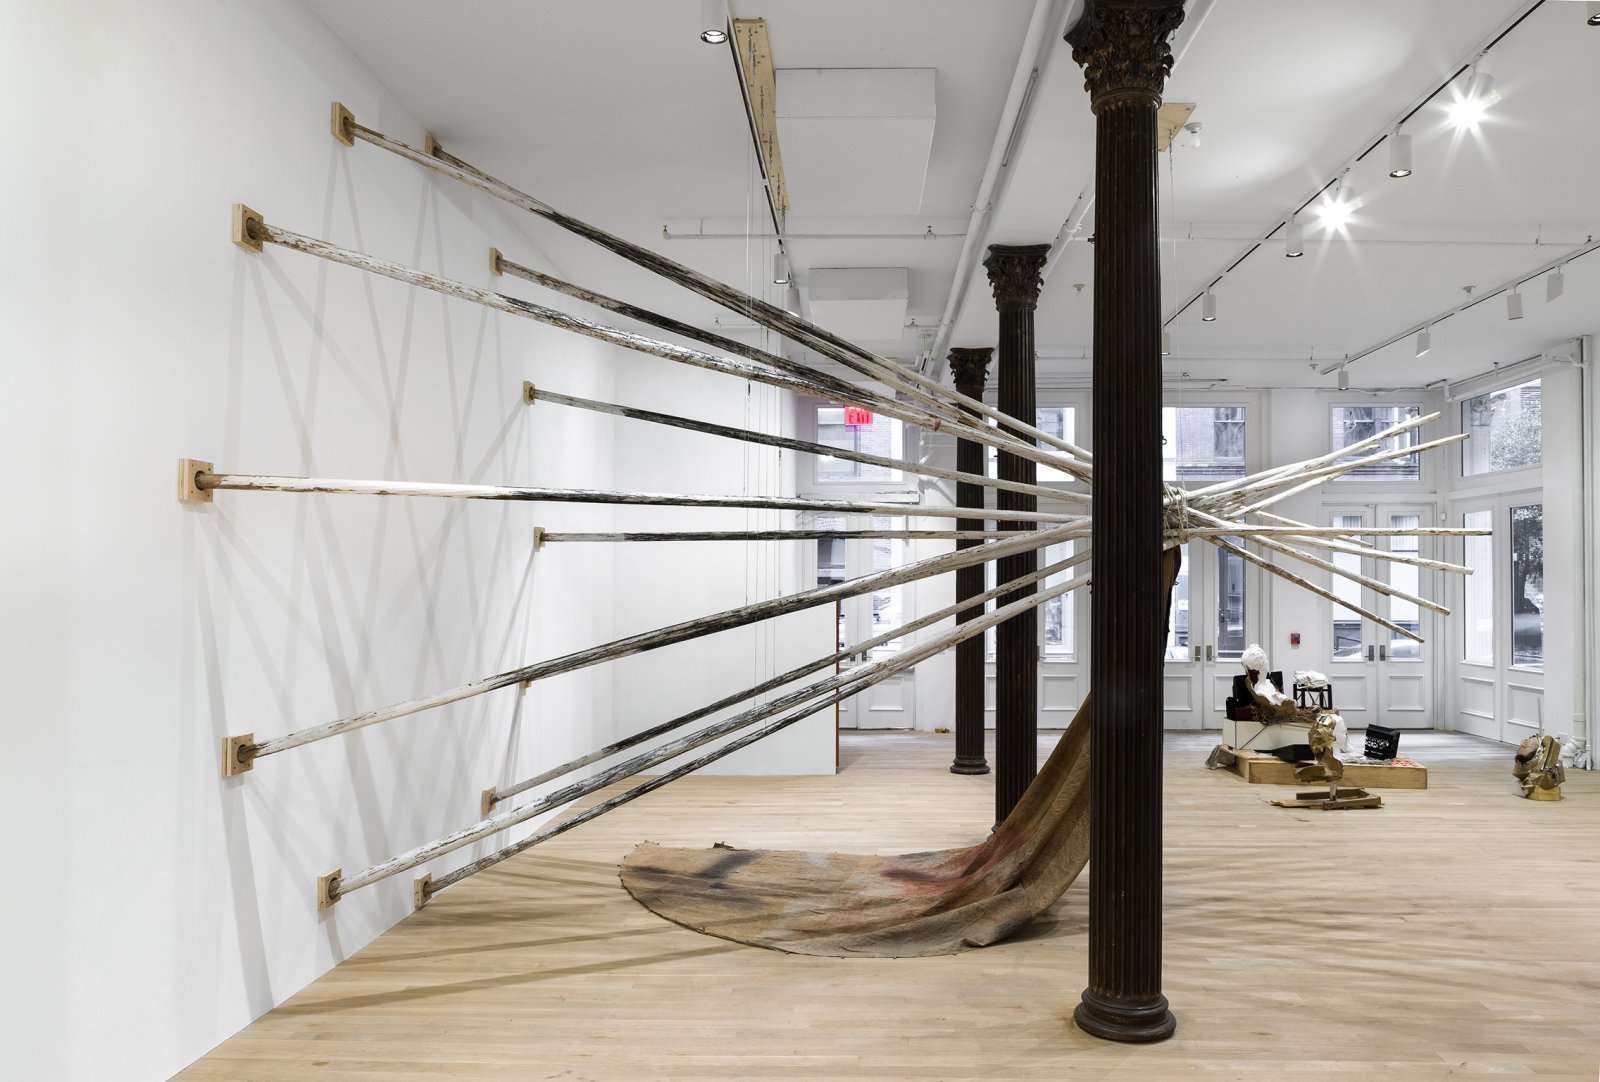 Duane Linklater, dislodgevanishskinground, 2019, 12 teepee poles, steel cable, white paint, charcoal, rope, digital print on linen, black tea, blueberry extract, sumac, charcoal, 220 x 174 x 174 in. (559 x 442 x 442 cm). Installation view, Artists Space, New York, USA, 2019